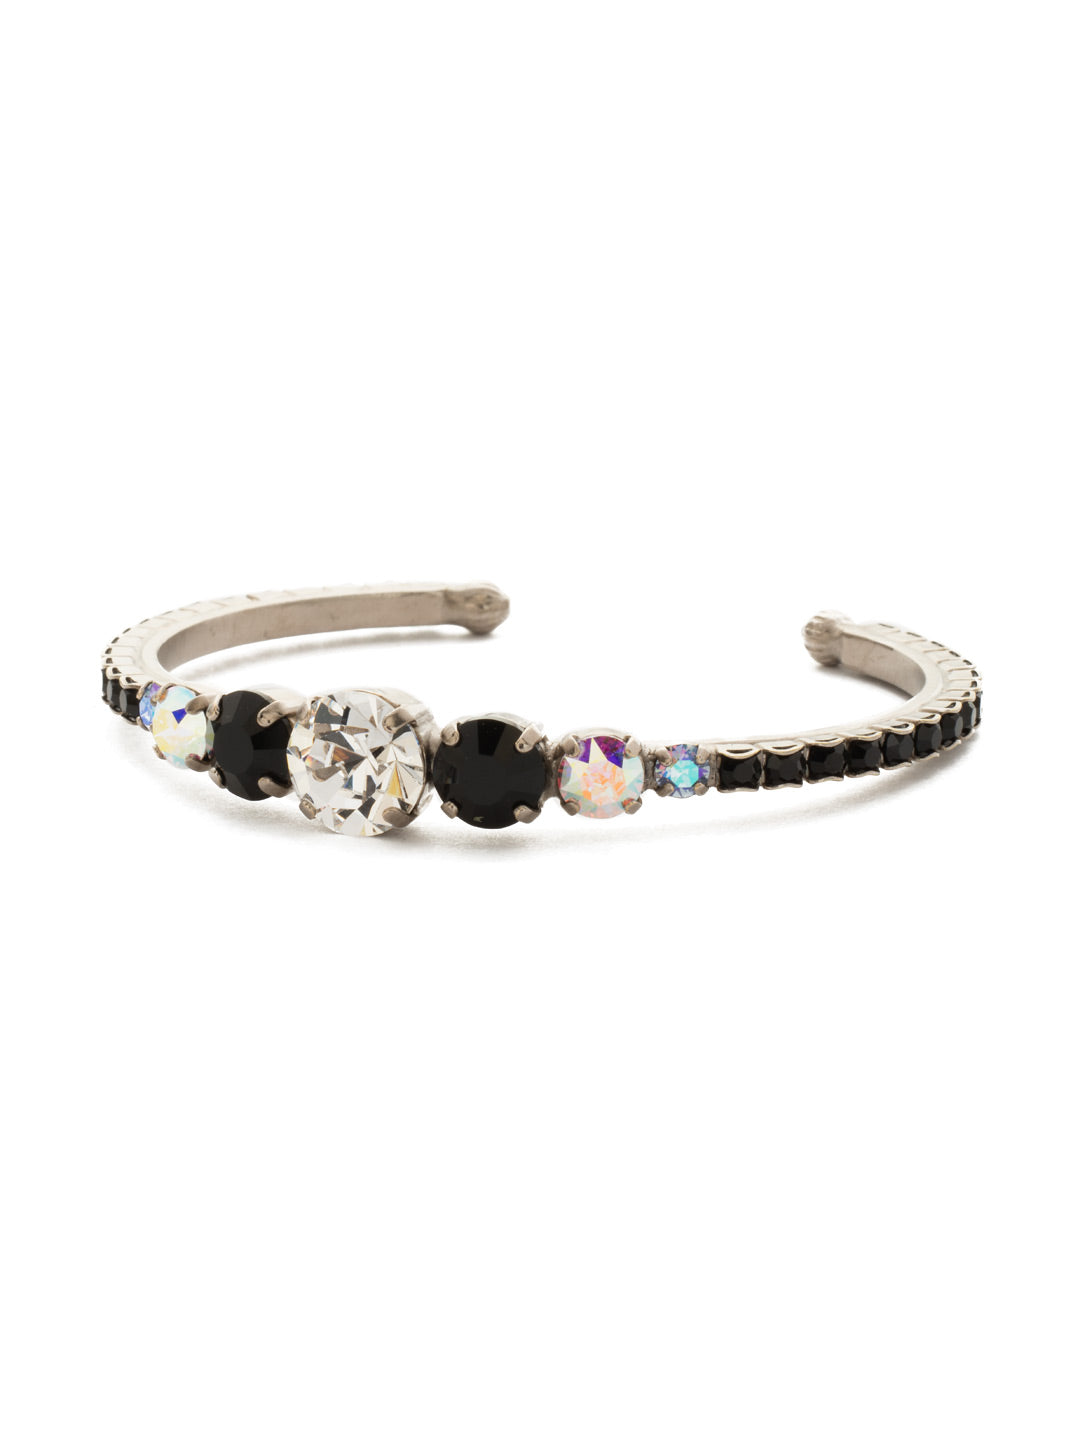 Dazzling Dotted Line Cuff Bracelet - BCQ14ASBLT - This cuff bracelet is pretty and petite yet packed with sparkle! Multi-sized round crystals cover this bracelet from end to end. Add this beauty to your current arm party or wear alone for a subtle statement. From Sorrelli's Black Tie collection in our Antique Silver-tone finish.